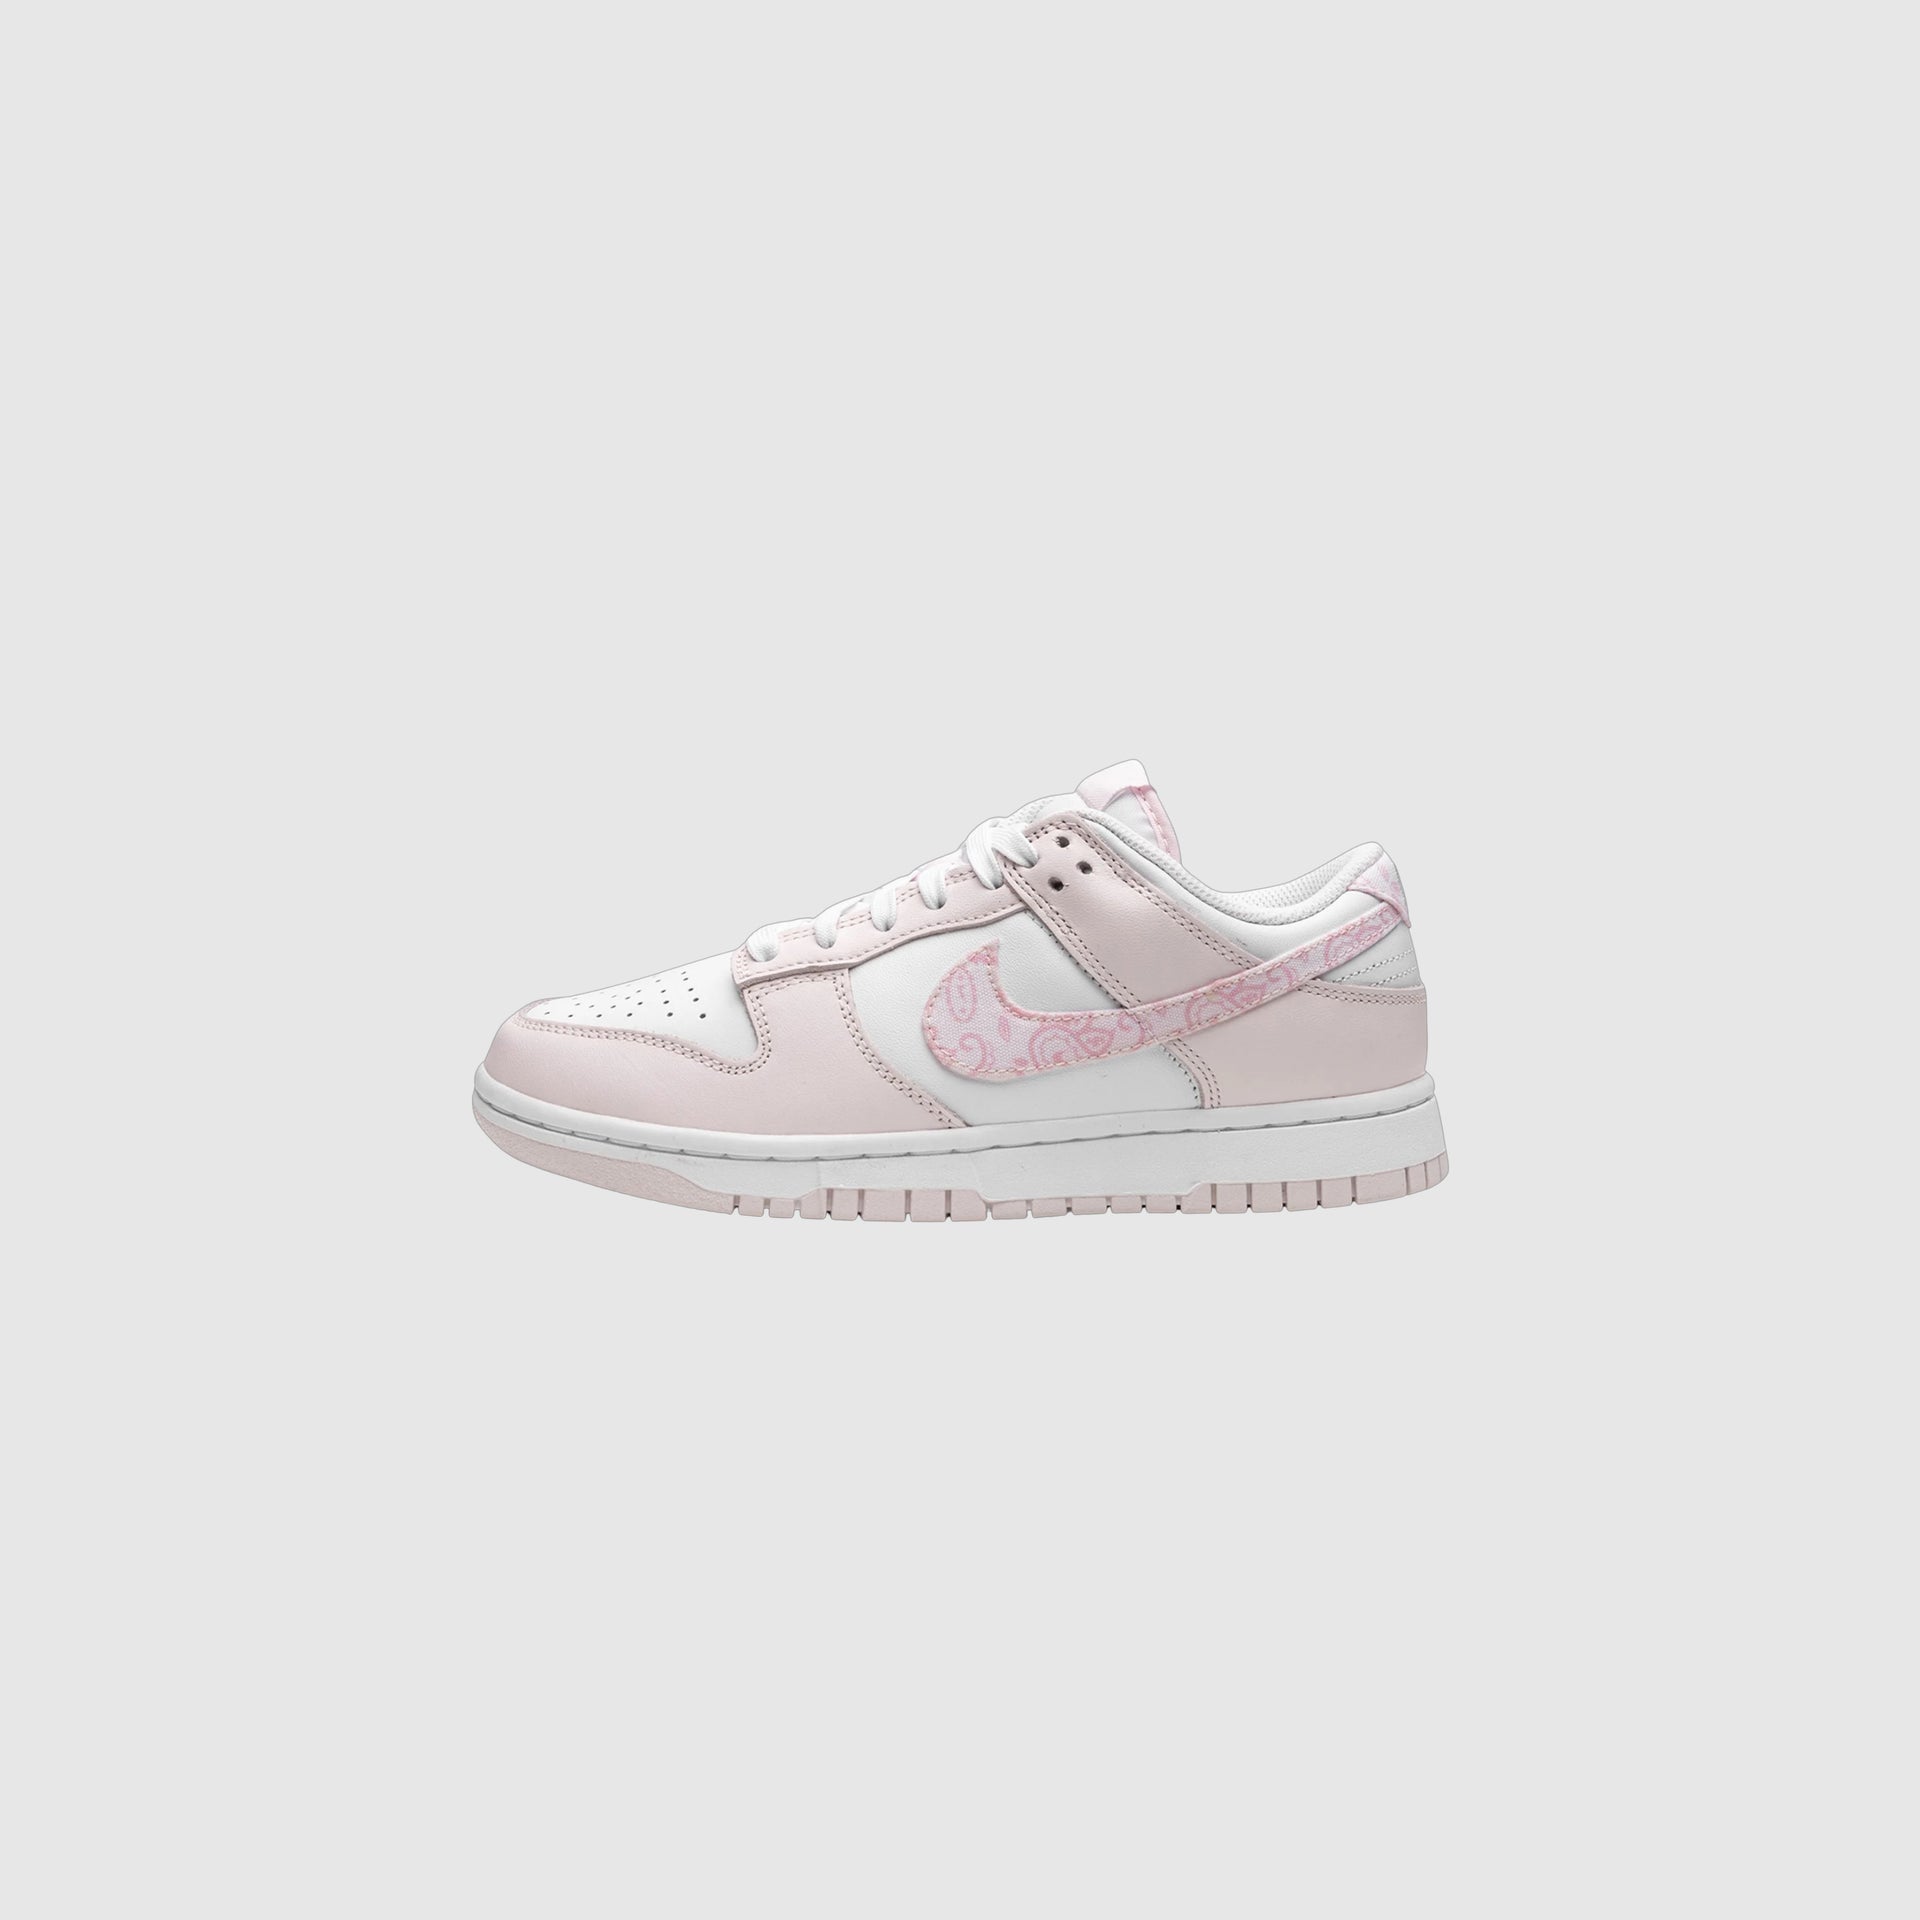 WMNS DUNK LOW "Pink Paisley"